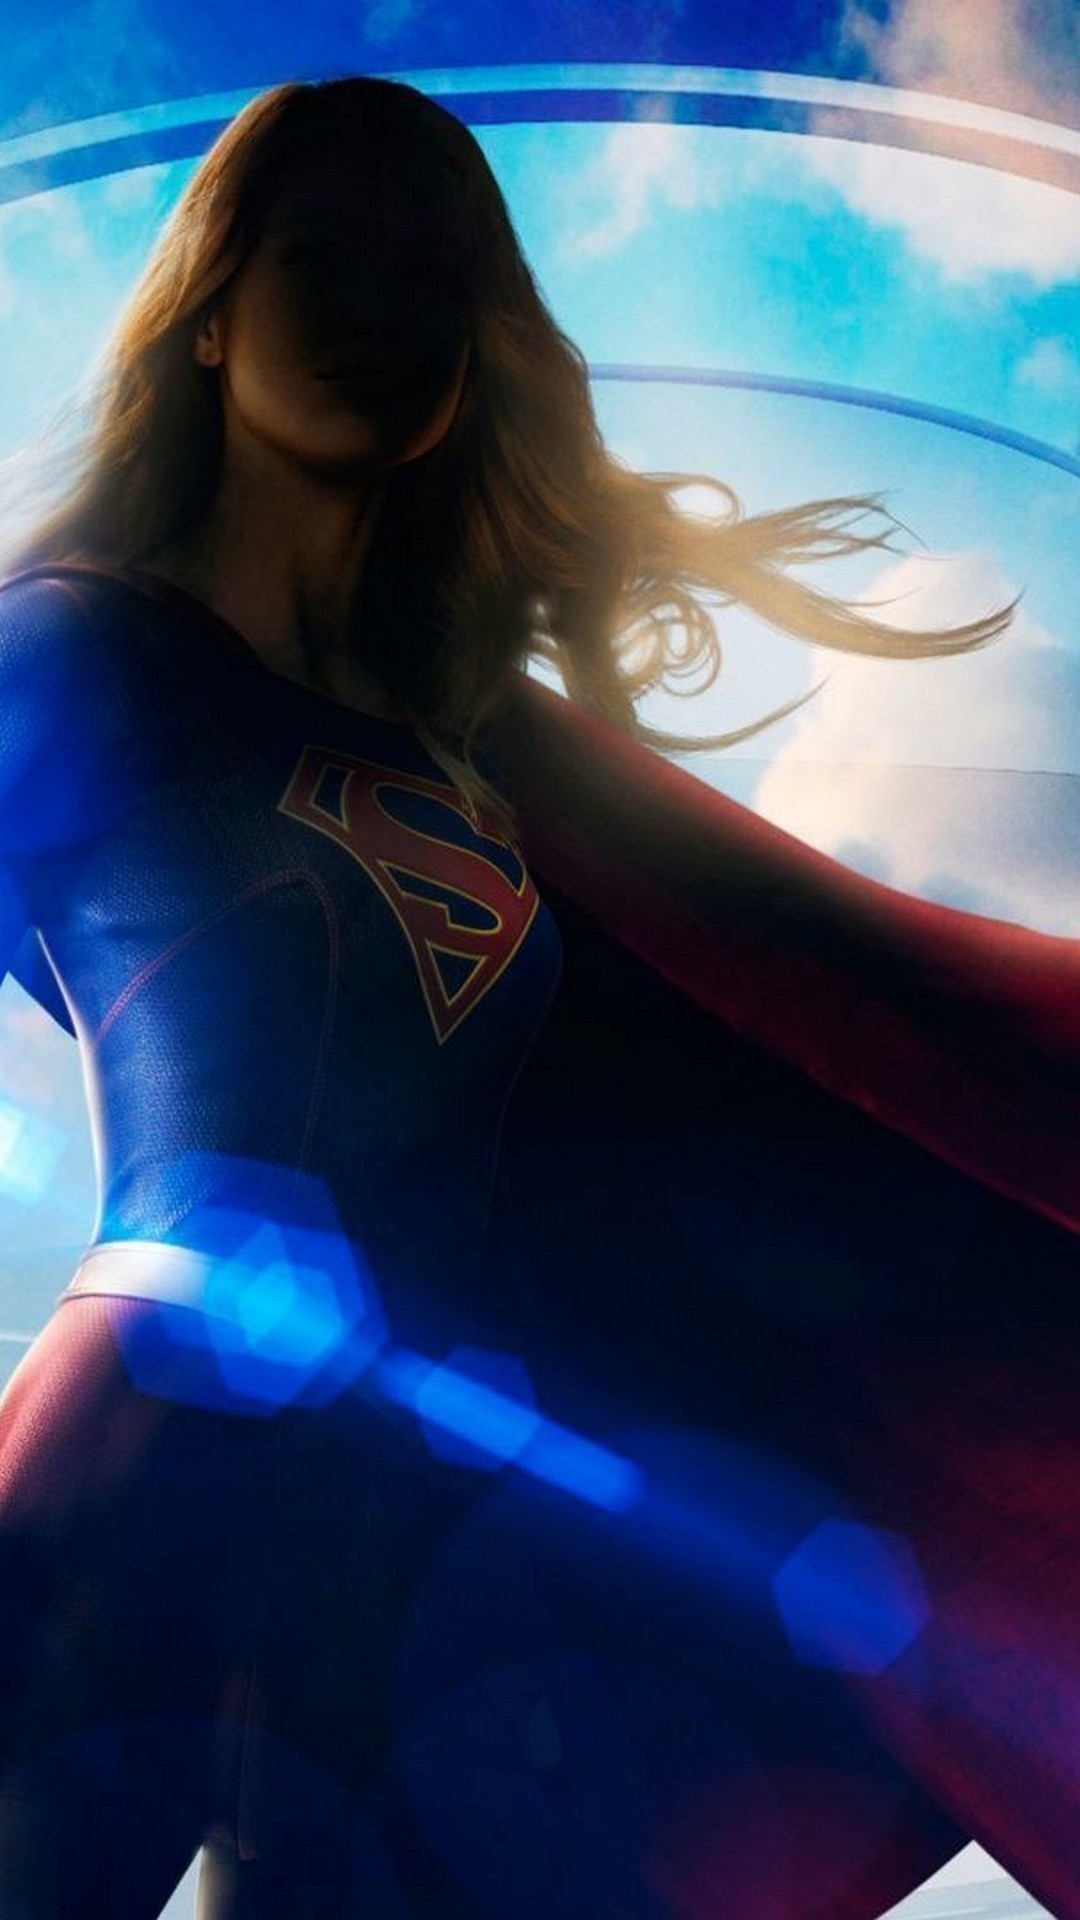 Supergirl iPhone 6 Wallpaper With high-resolution 1080X1920 pixel. You can use this wallpaper for your iPhone 5, 6, 7, 8, X, XS, XR backgrounds, Mobile Screensaver, or iPad Lock Screen